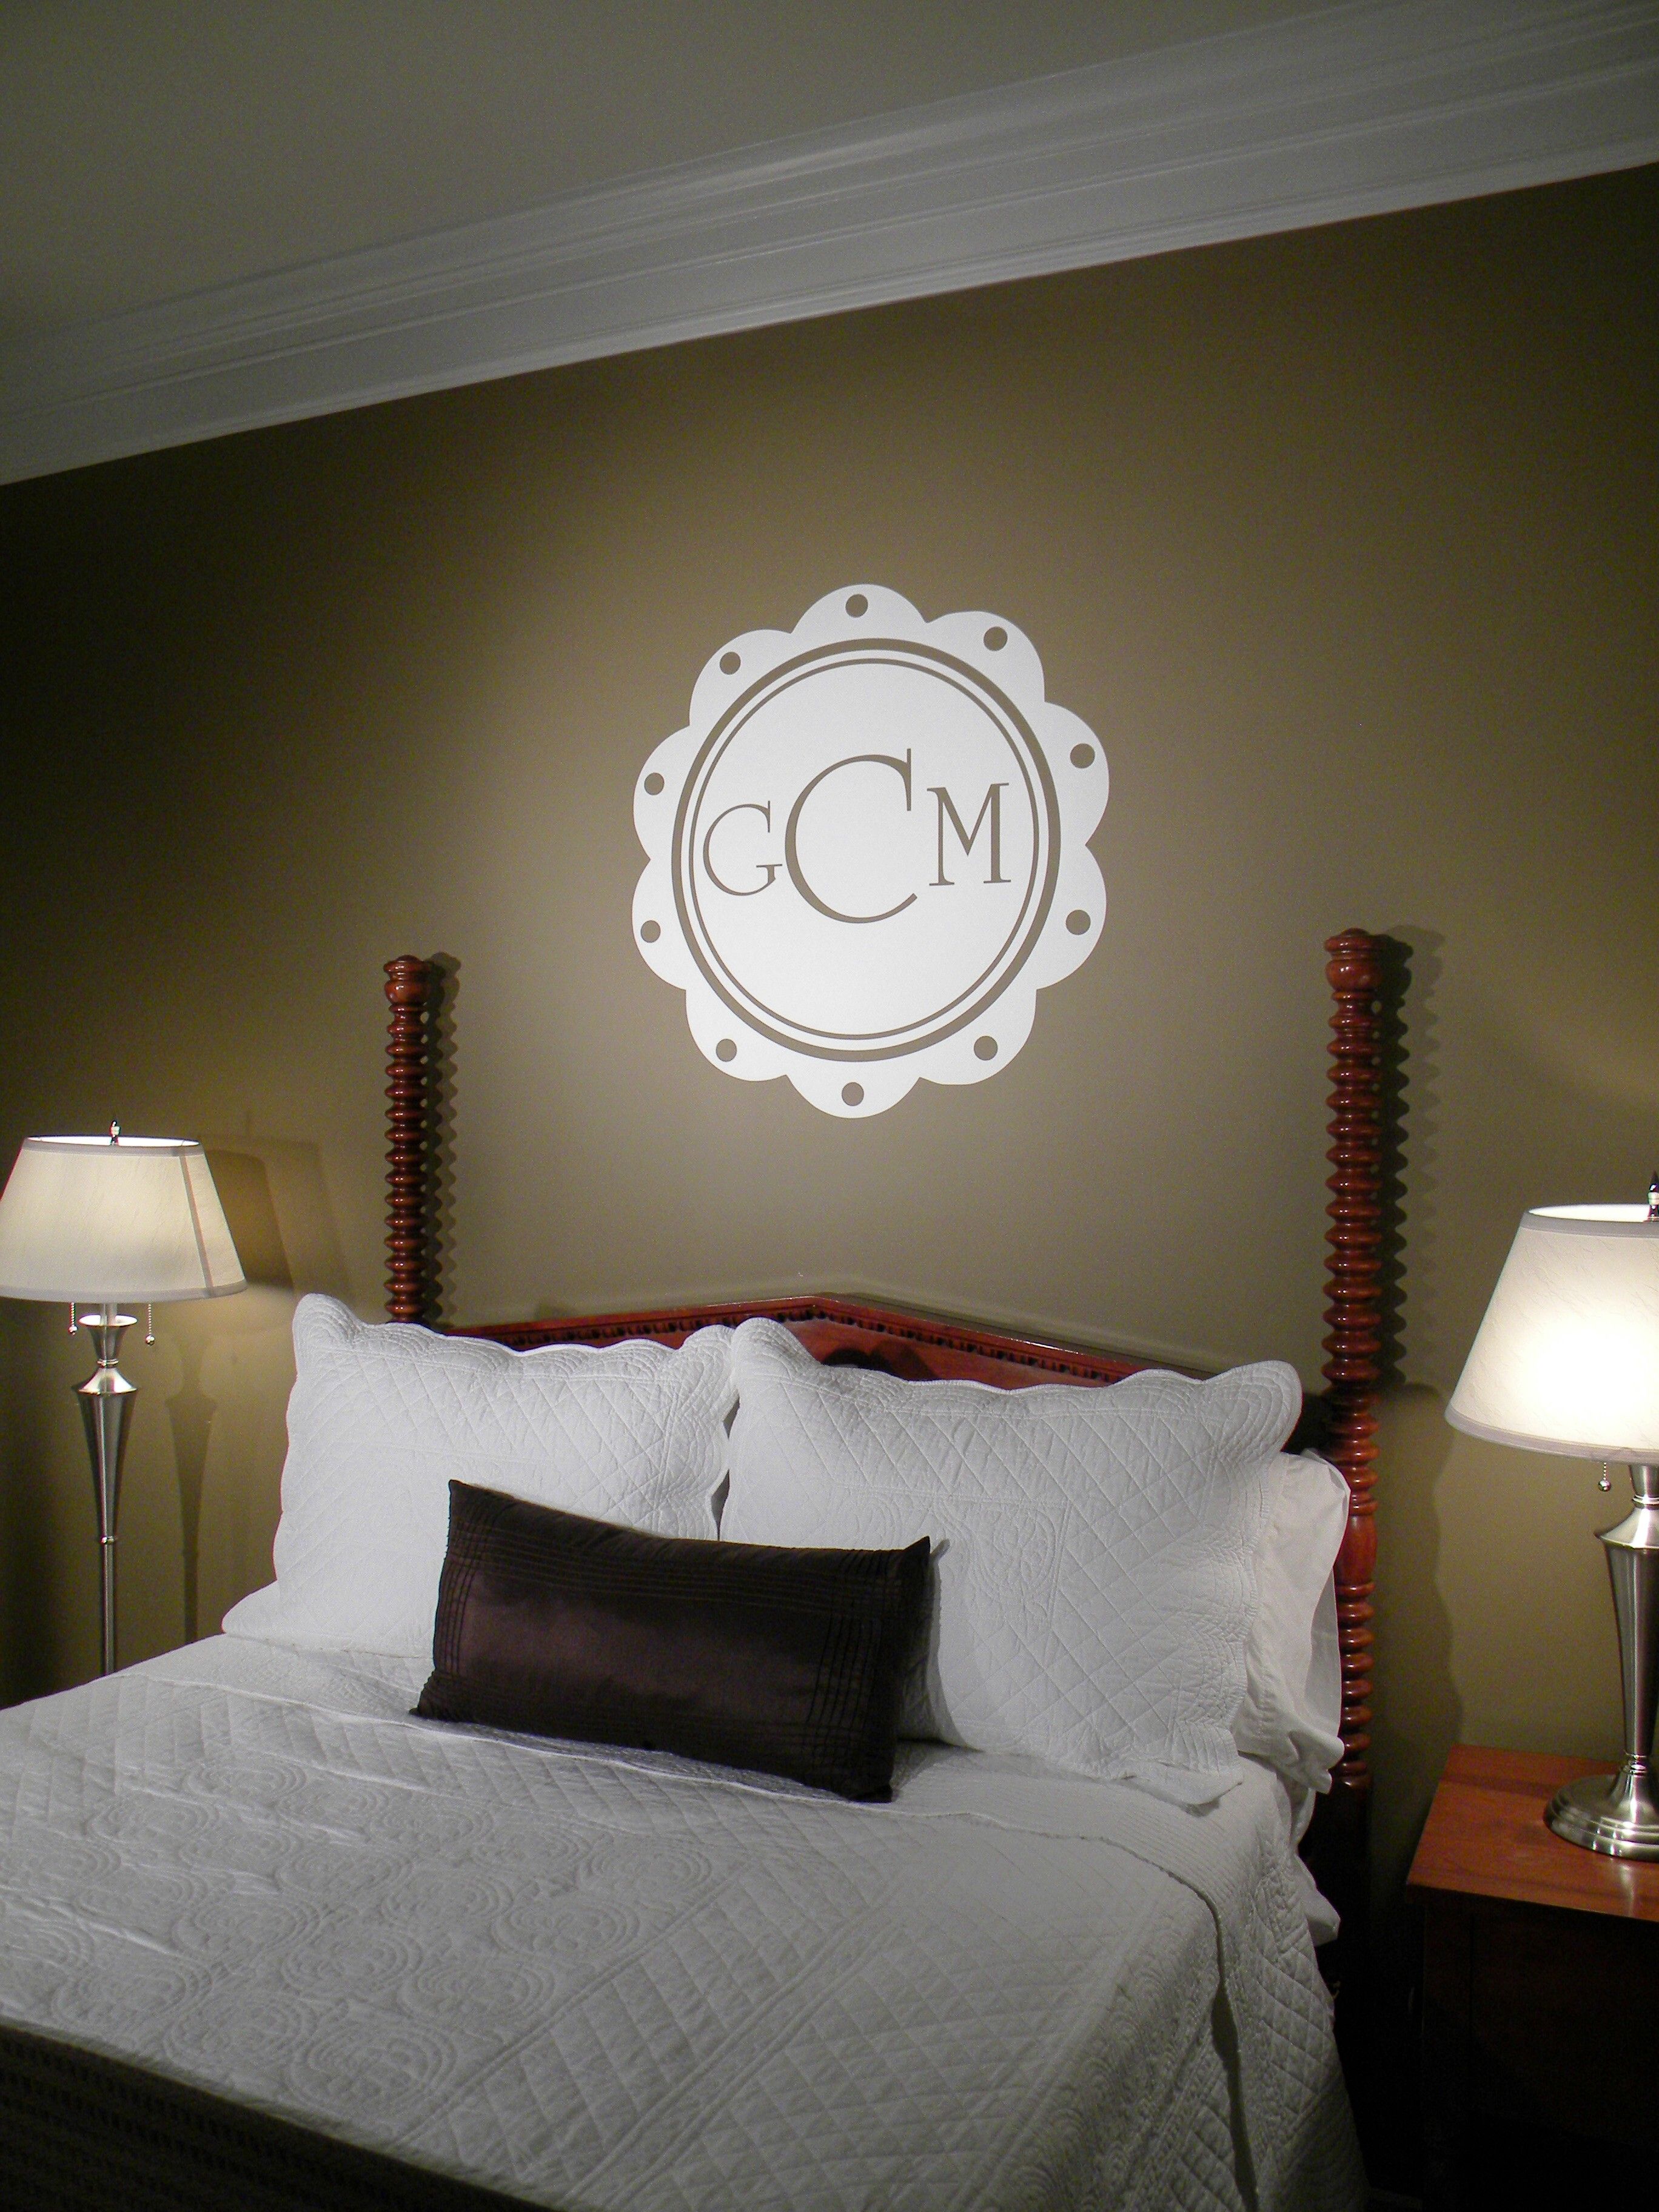 Vinyl Wall Decor: A Touch Of Homely Charm